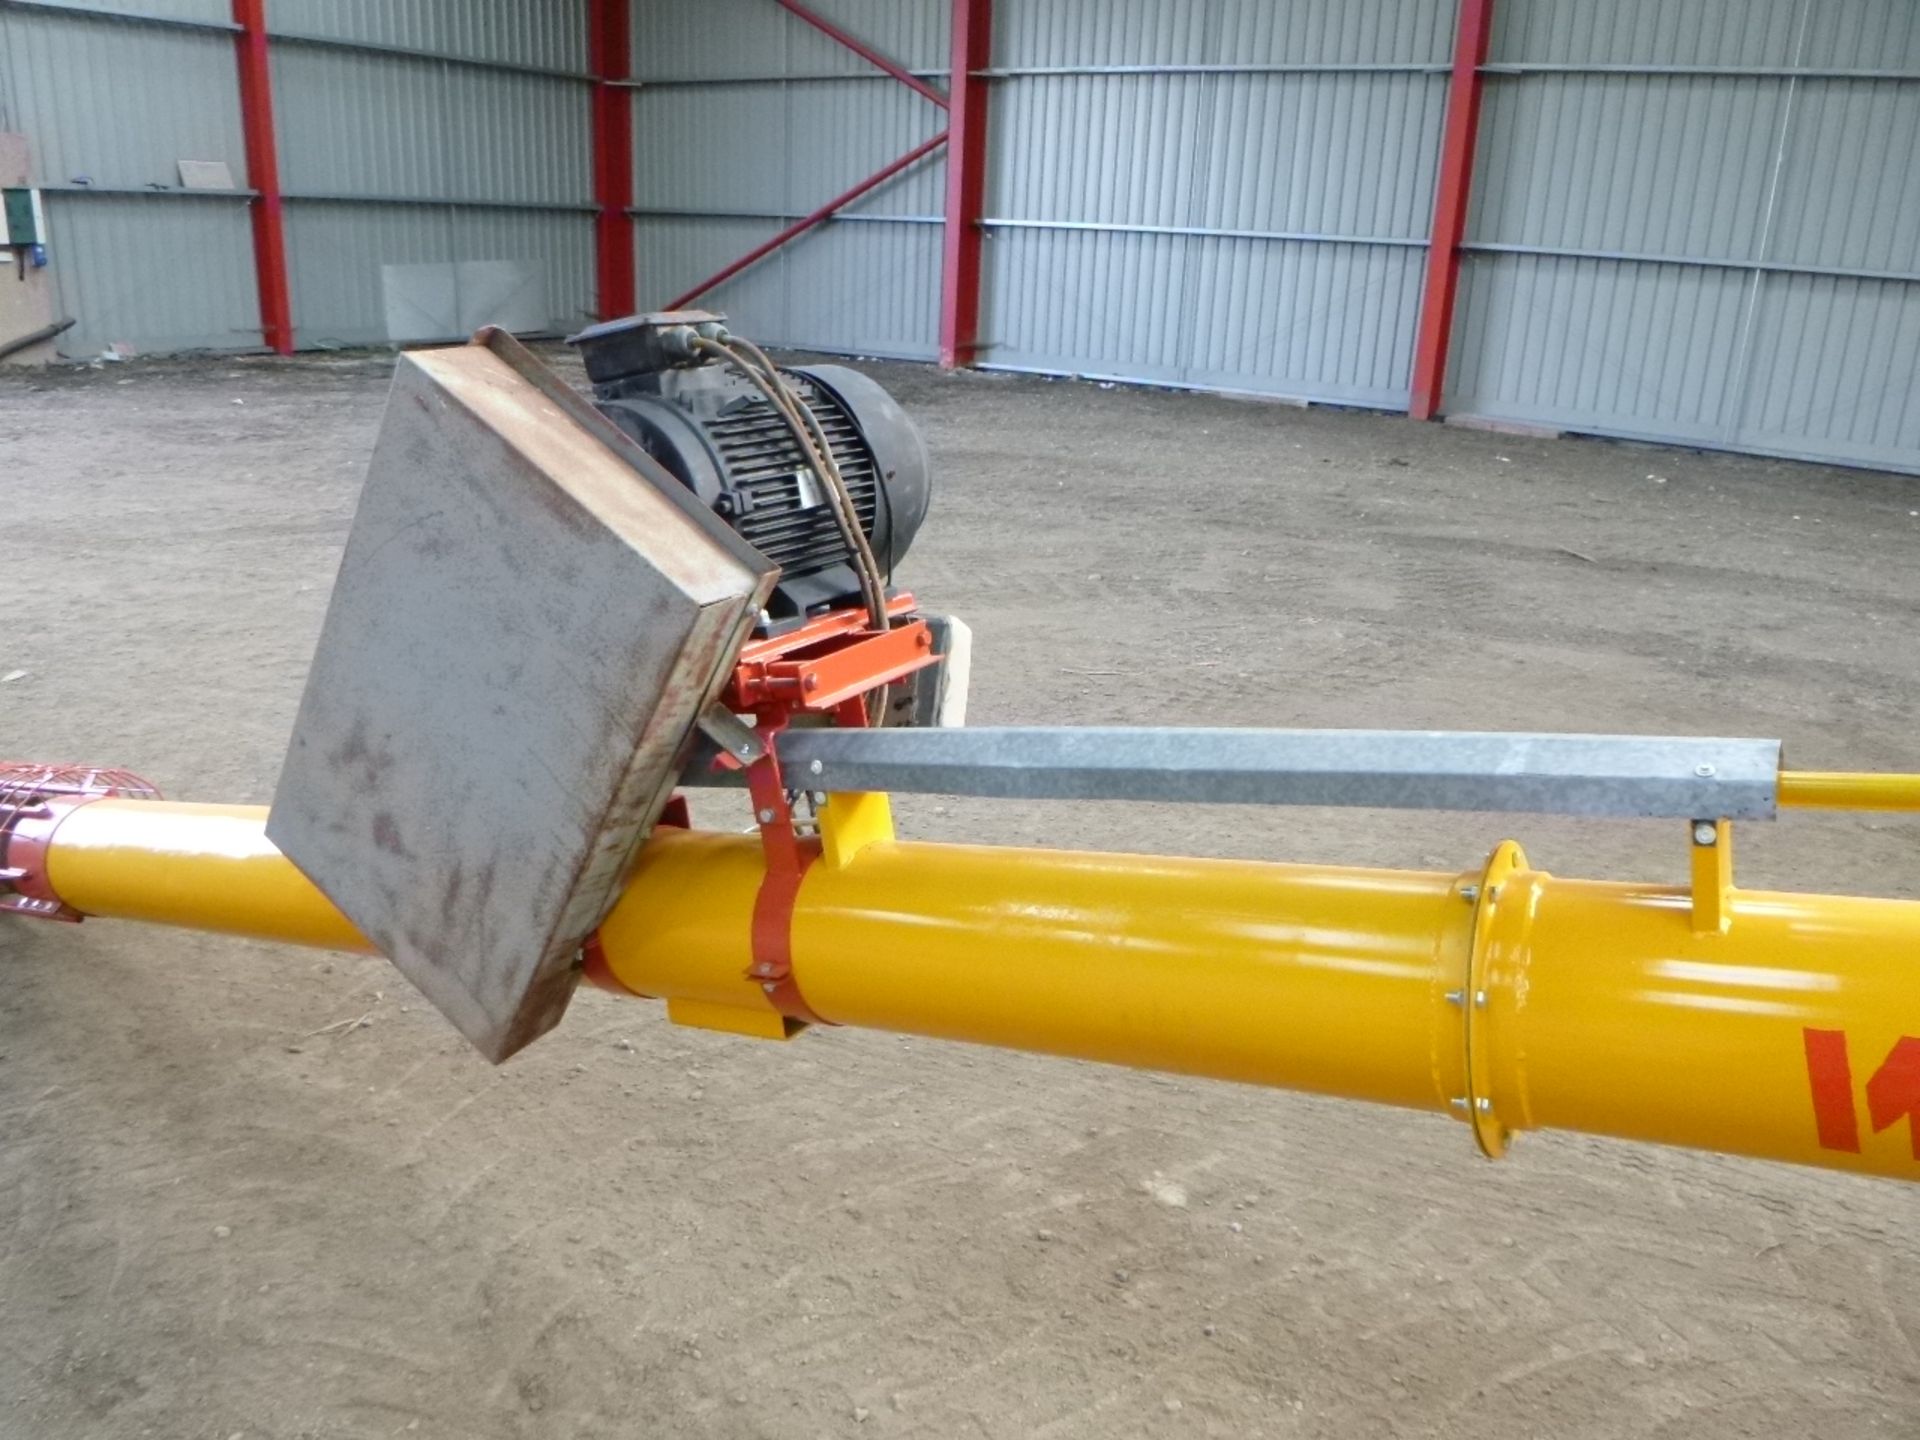 Westfield WR 100-61 Grain Auger, approx. 61'/18.5m long, 10in./250mm dia., capacity up to 120tph, - Image 8 of 18